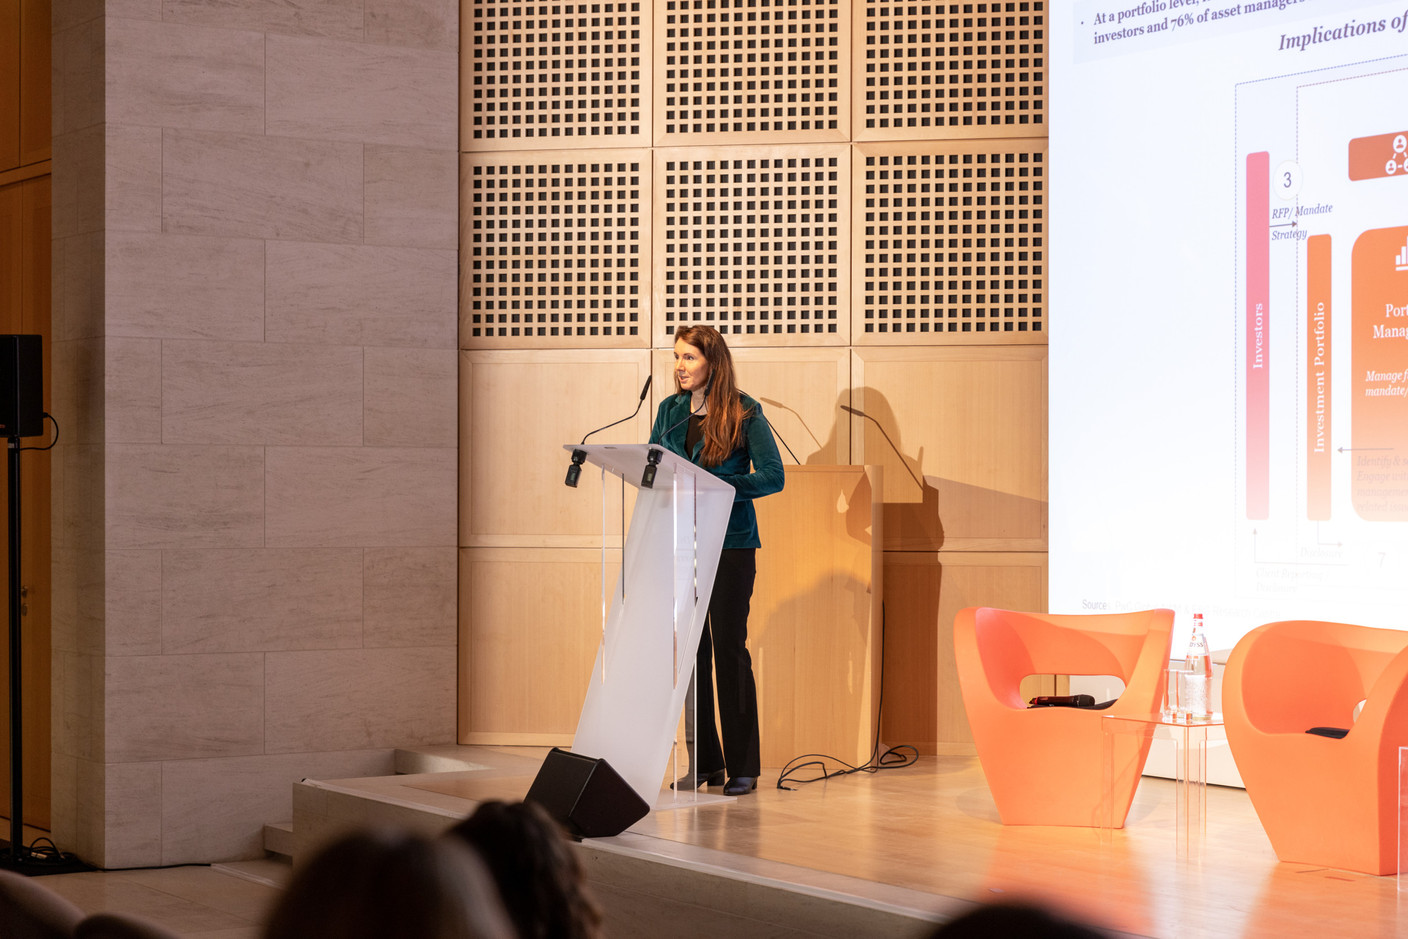 Isabelle Delas, CEO of Luxflag, is seen speaking at Luxflag Sustainable Investment Week 2022, 17 October 2022. Photo: Romain Gamba/Maison Moderne